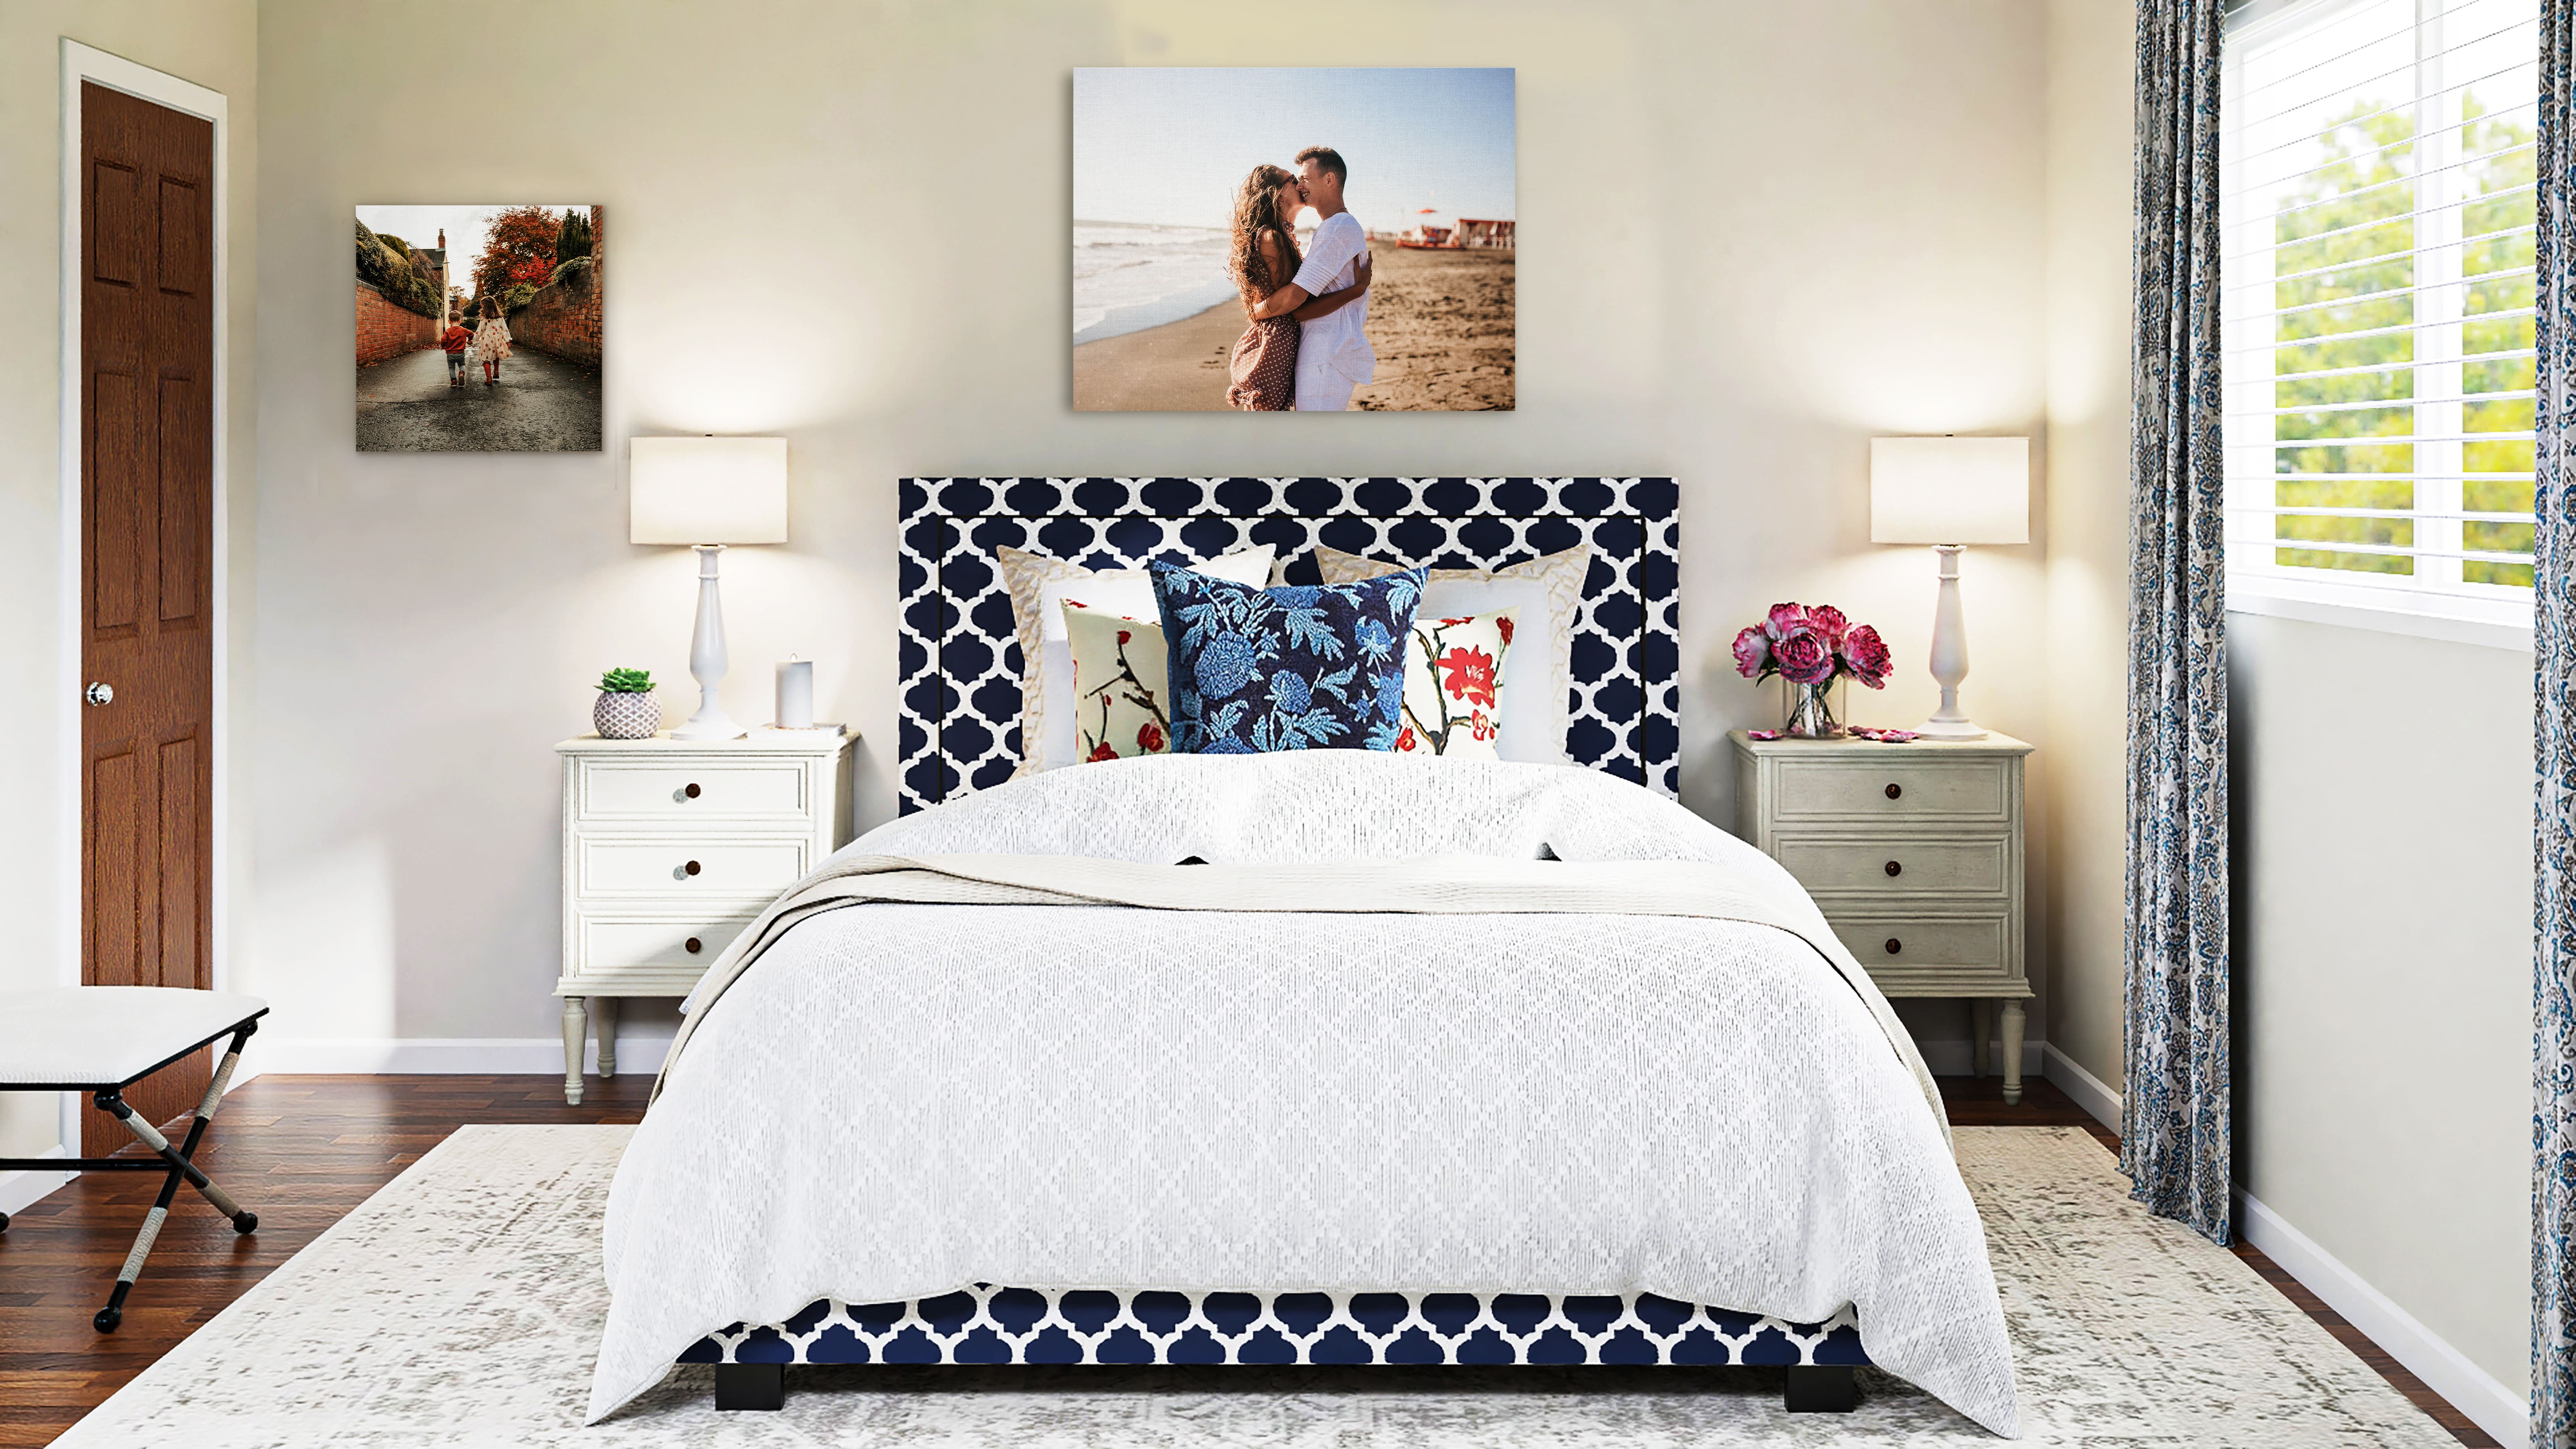 Canvas prints in bedroom of family